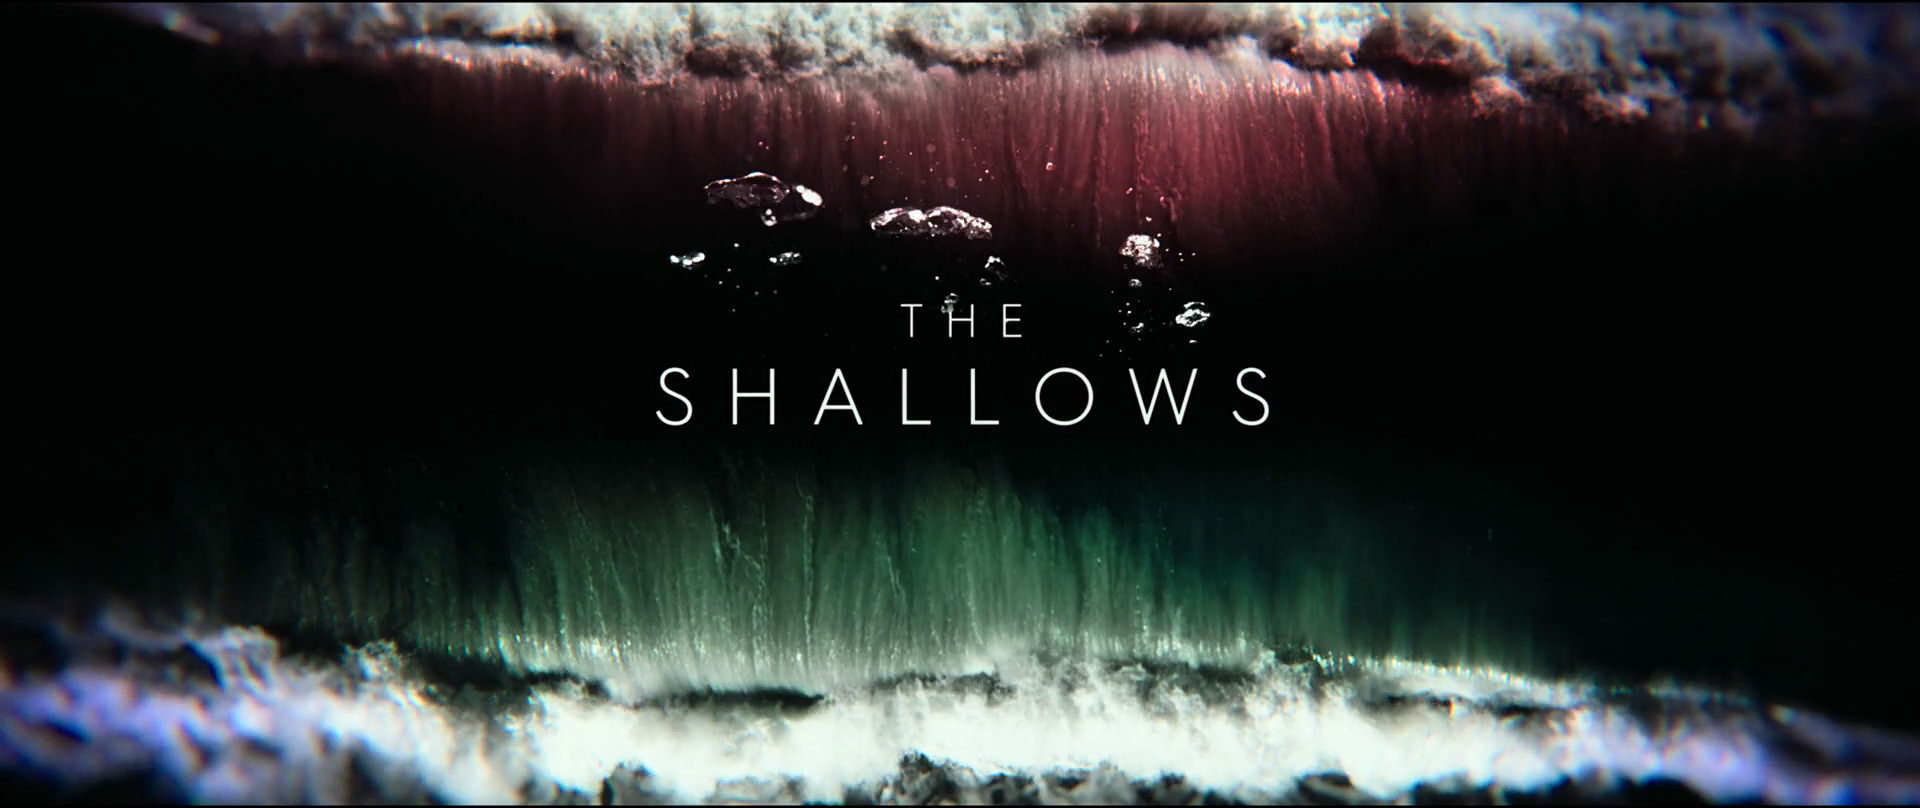 the shallows full movie online hd